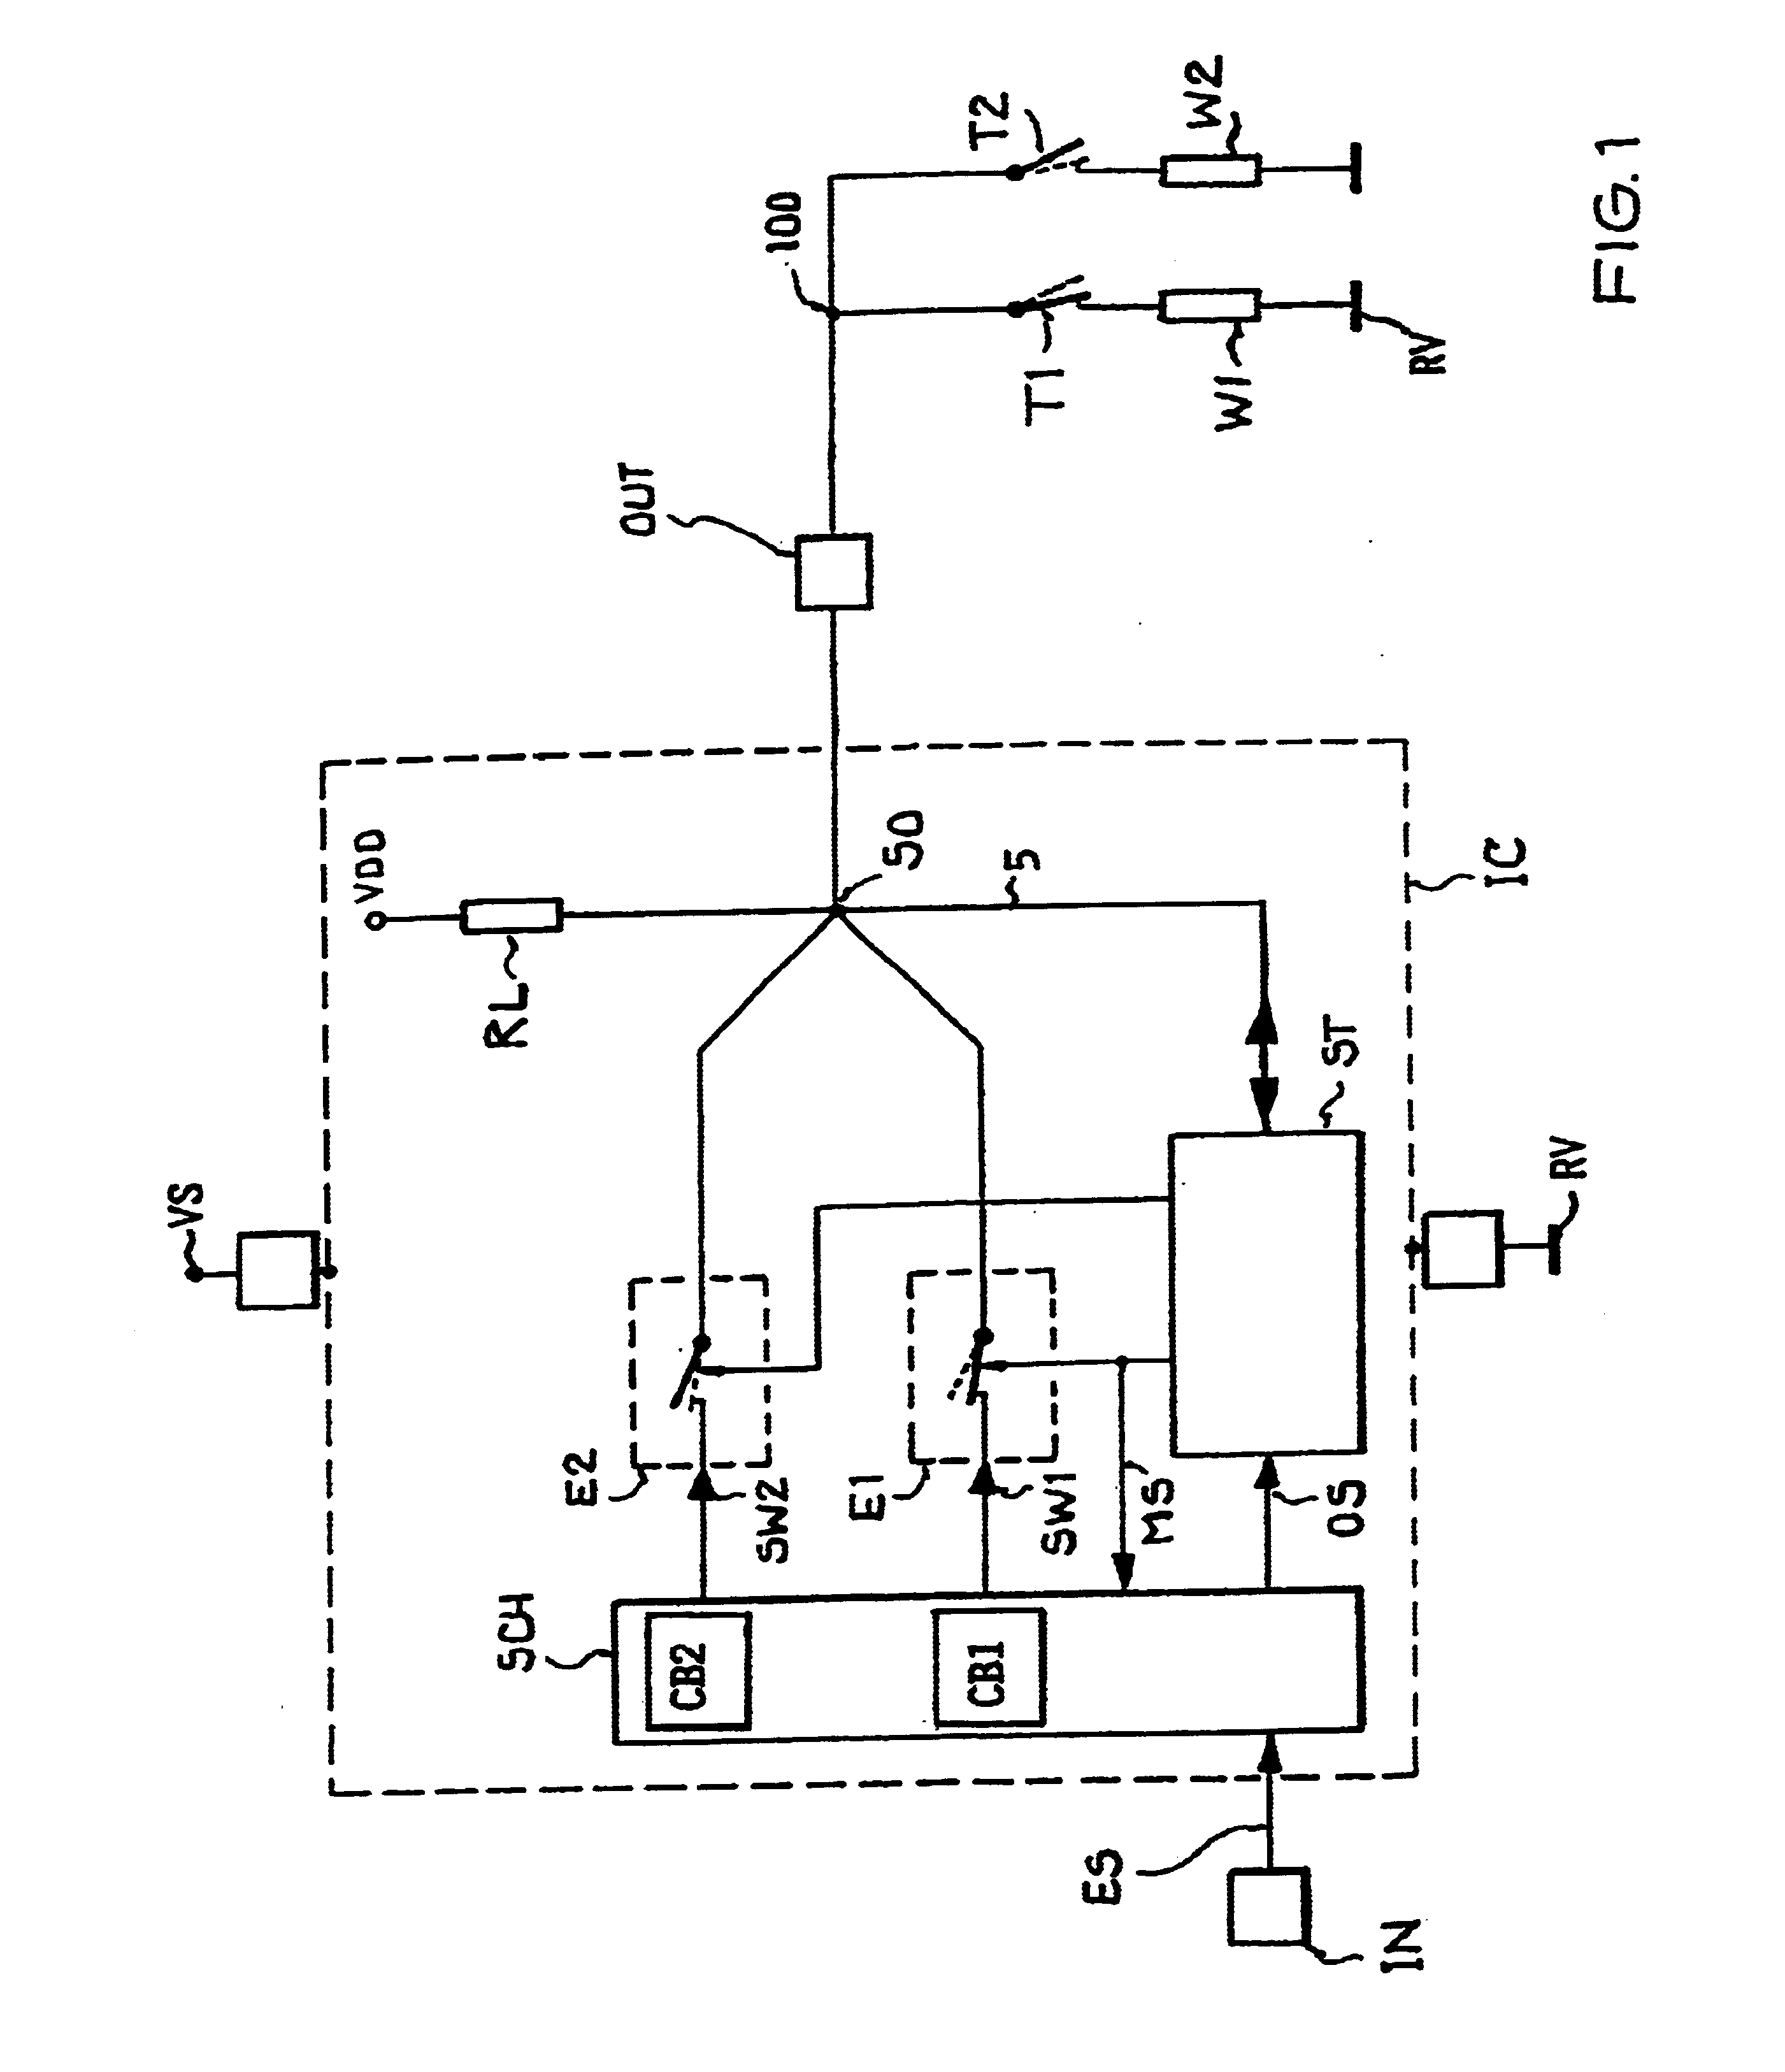 Method for testing an integrated circuit with an external potential applied to a signal output pin